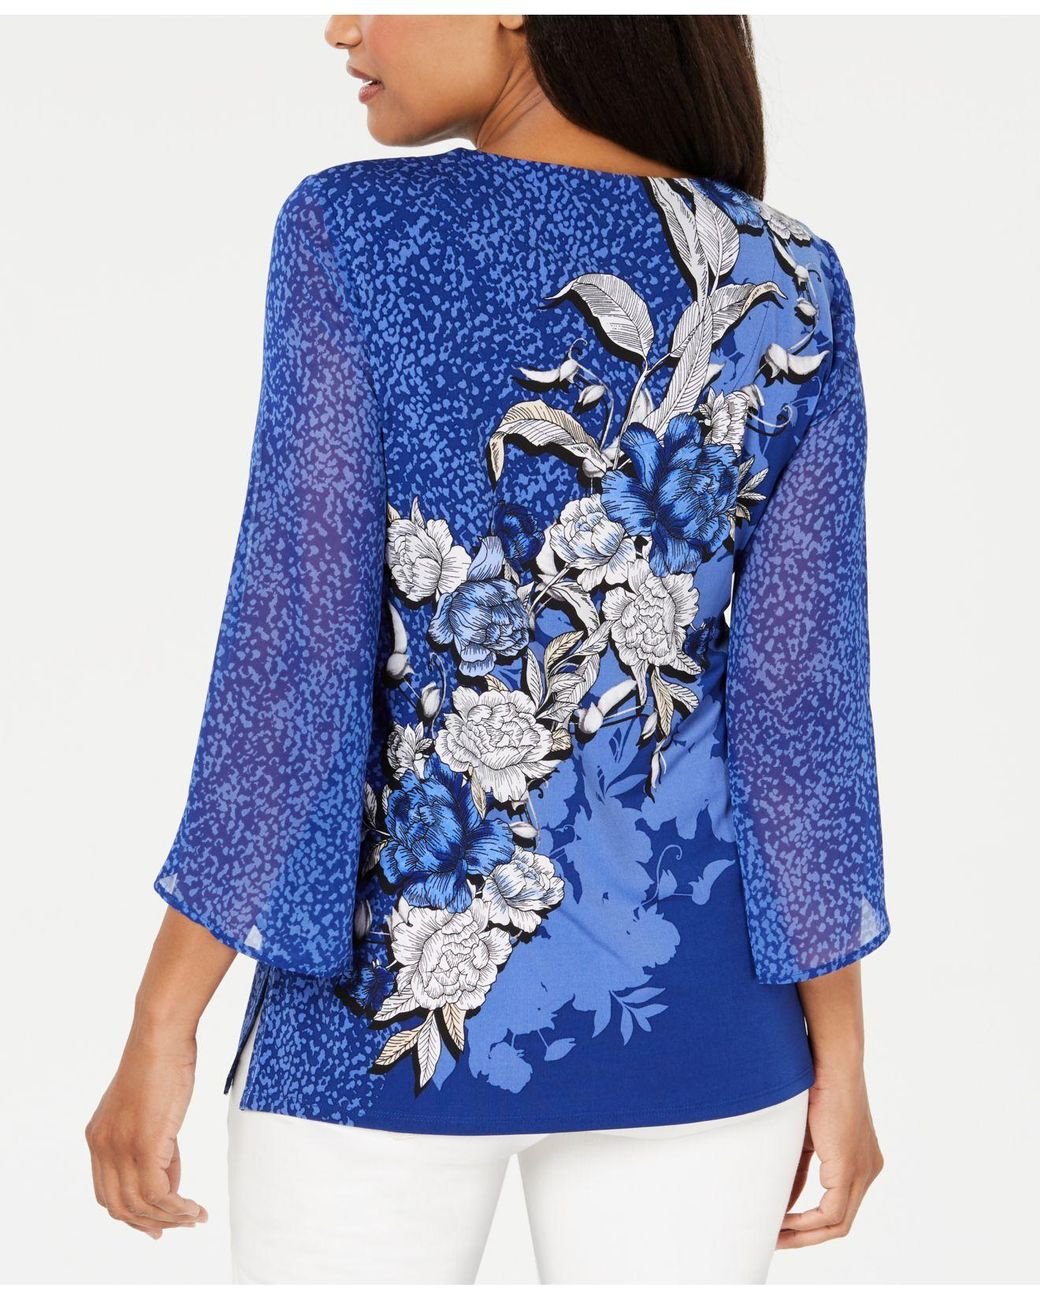 Jm Collection Petite Floral-Print Satin Blouse, Created for Macy's